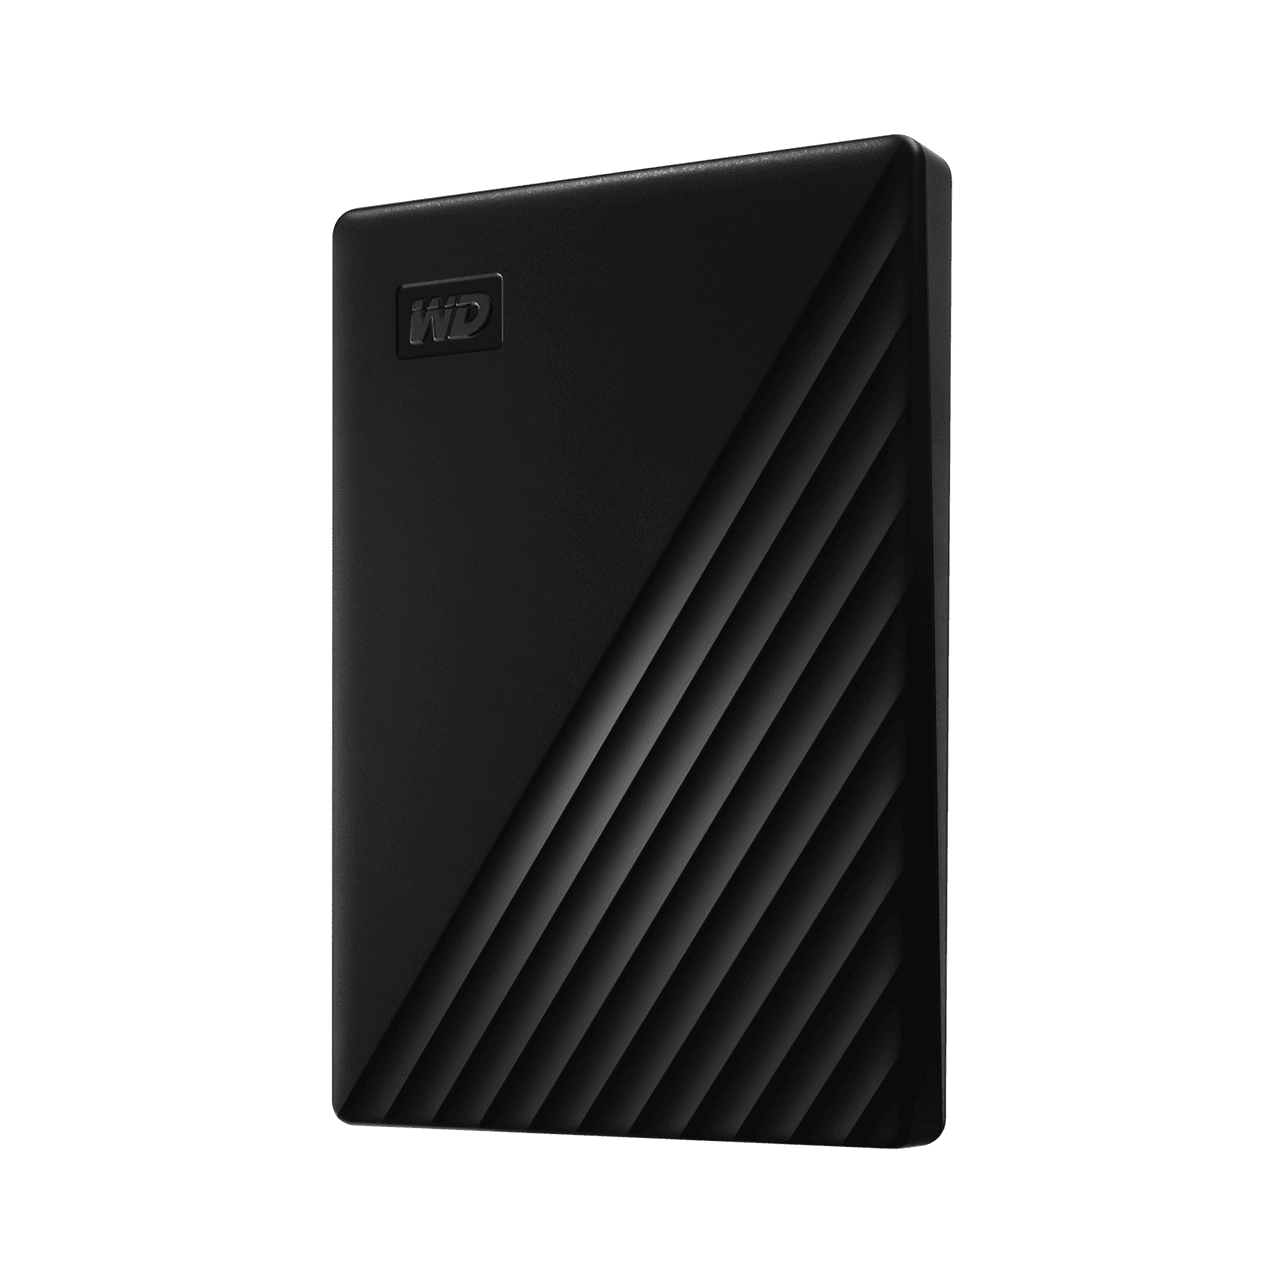 WD Western Digital My Passport 4TB (Black) Slim Portable External Hard Disk USB 3.0 With WD Backup Software & Password Protection